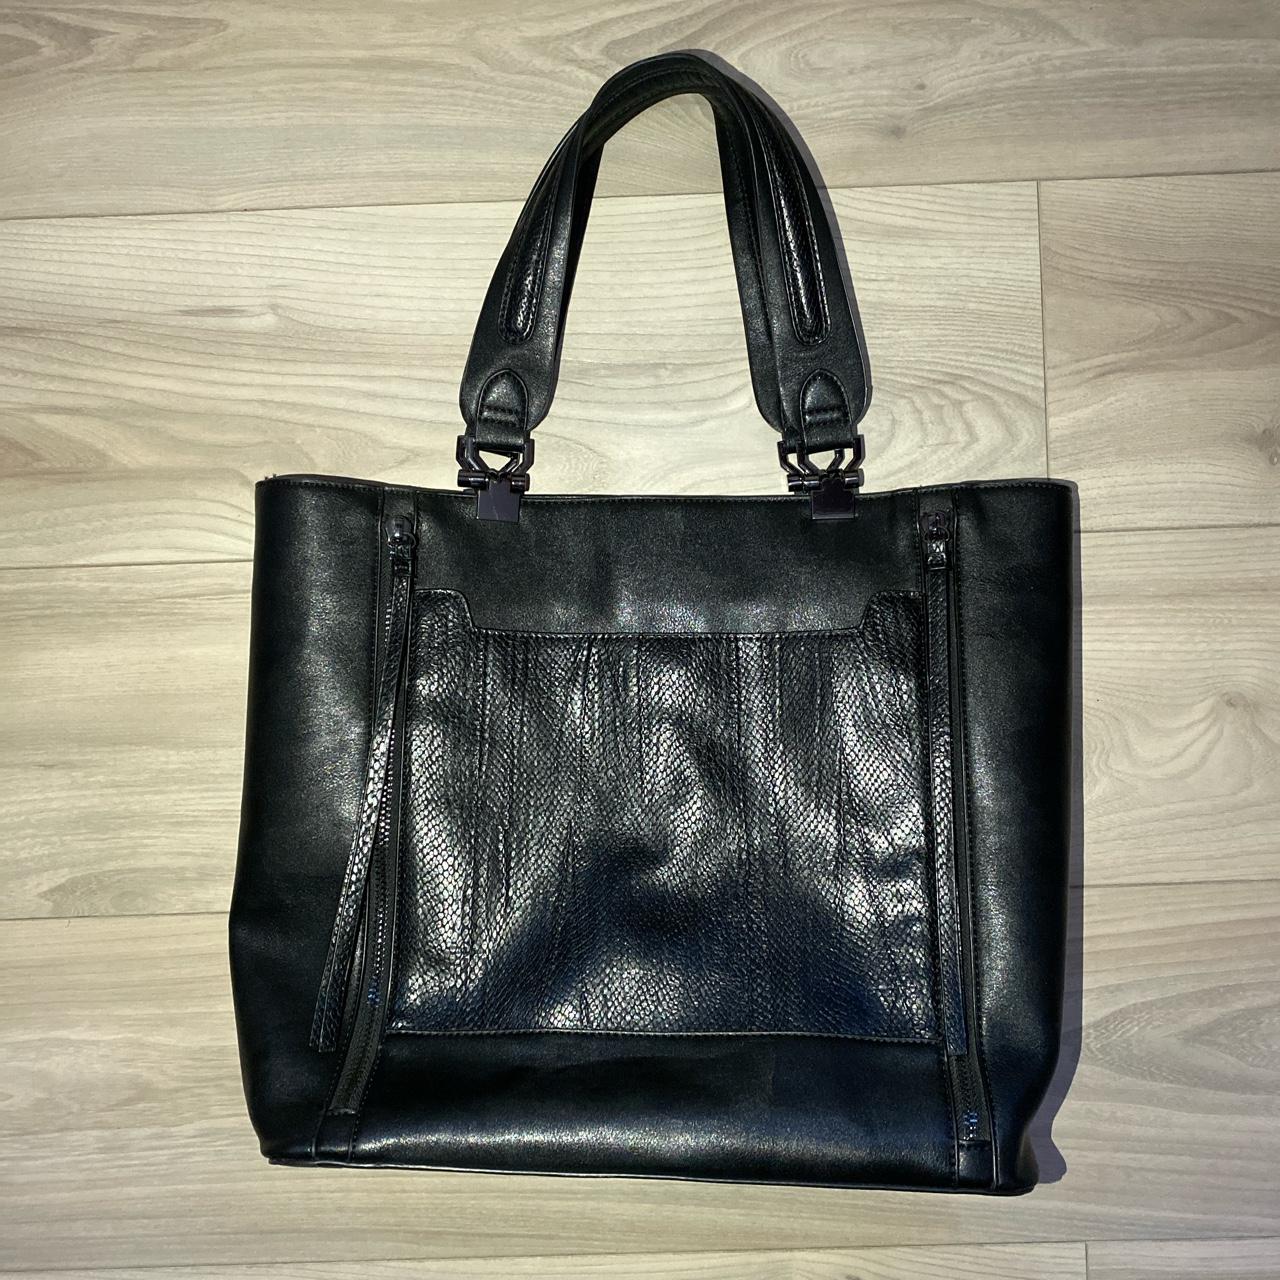 Warehouse large black tote bag Faux leather with... - Depop